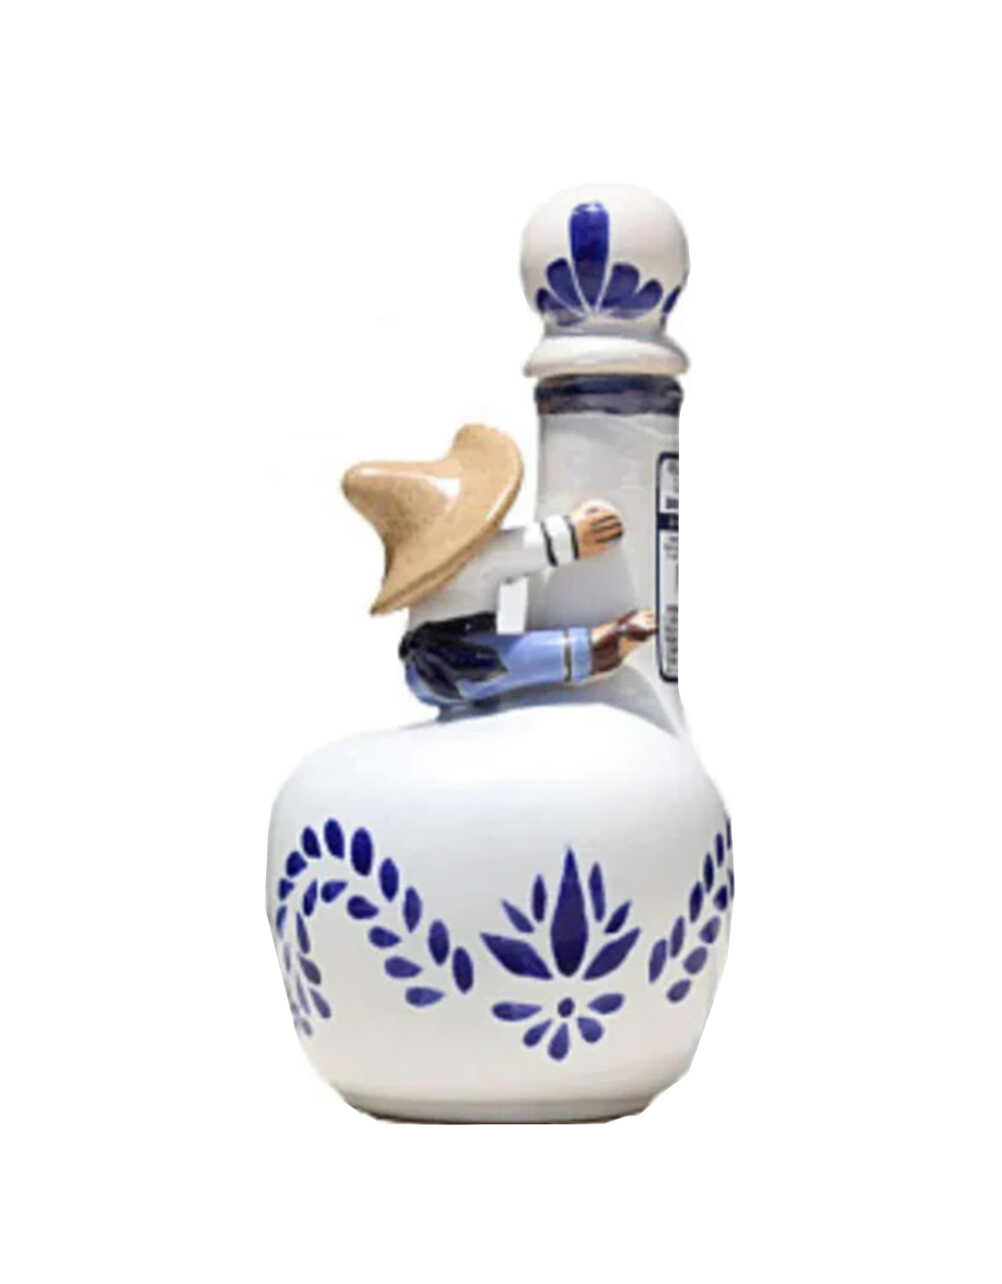 Don Pipocho Extra Anejo white and blue ceramic Tequila